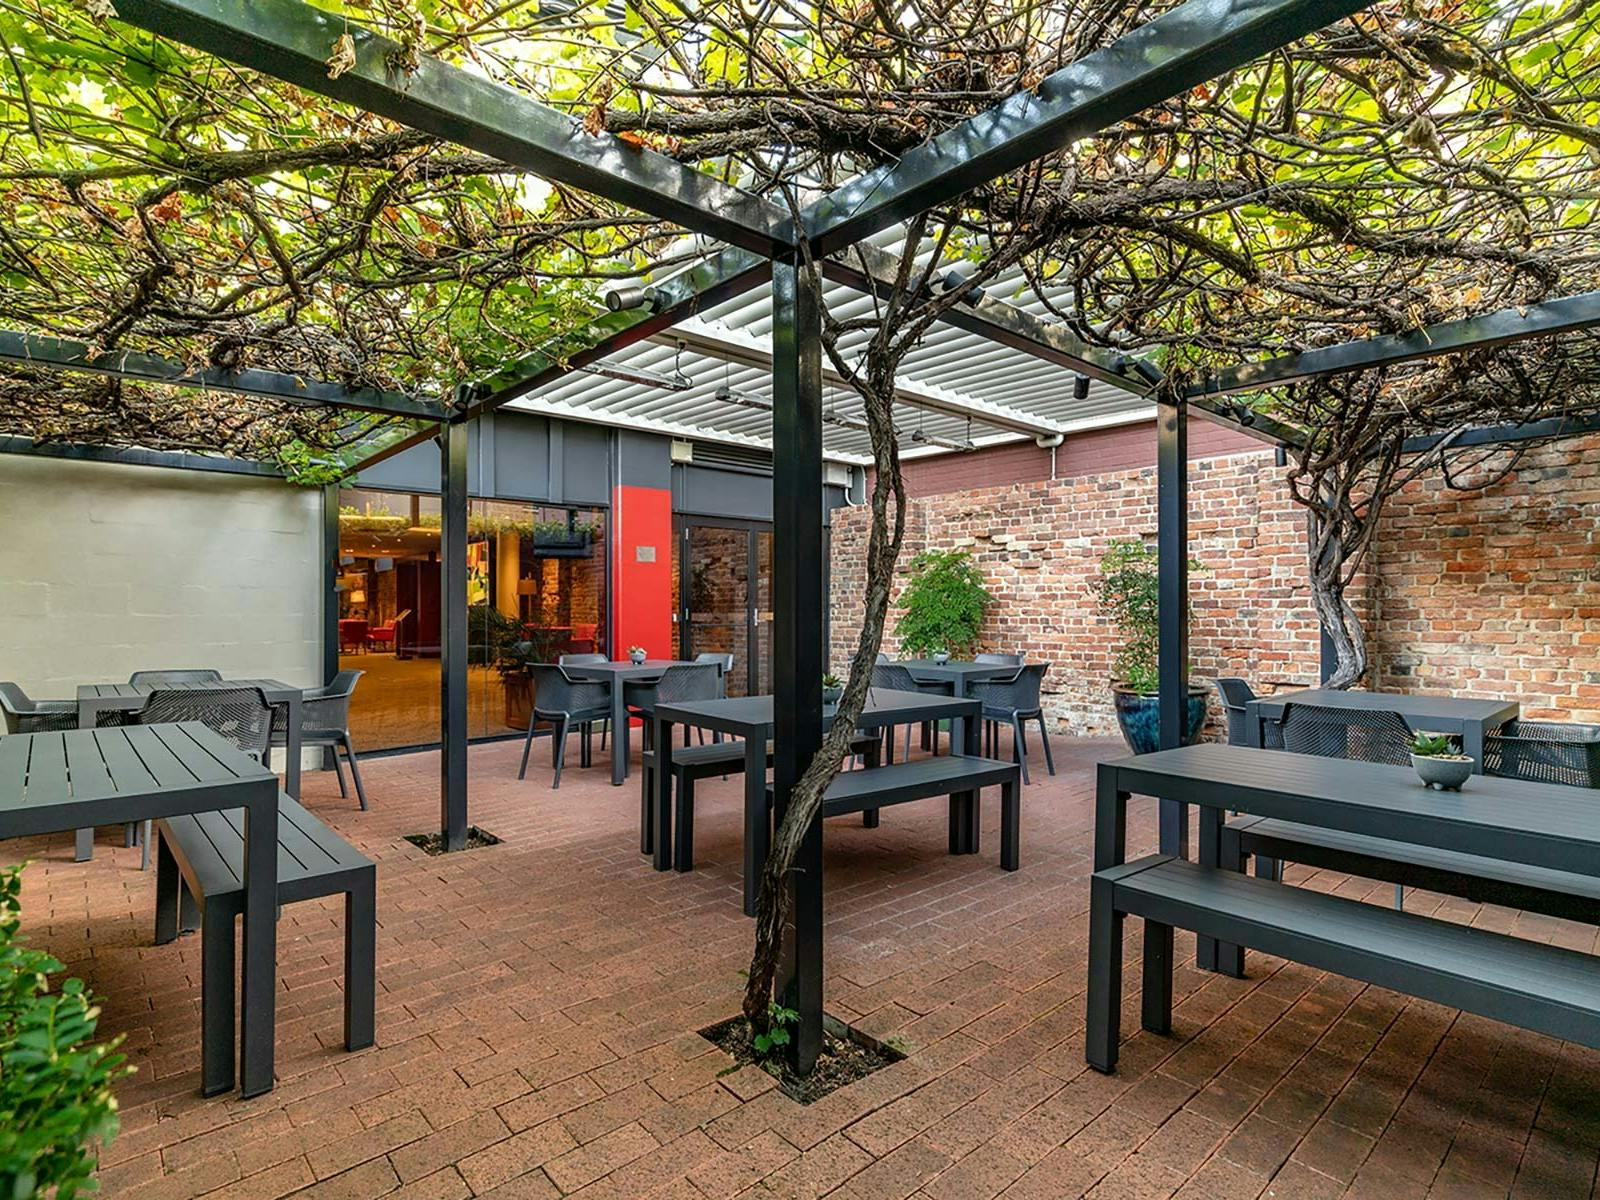 Outdoor brick courtyard. Pergola like structure covered in lush green vines.